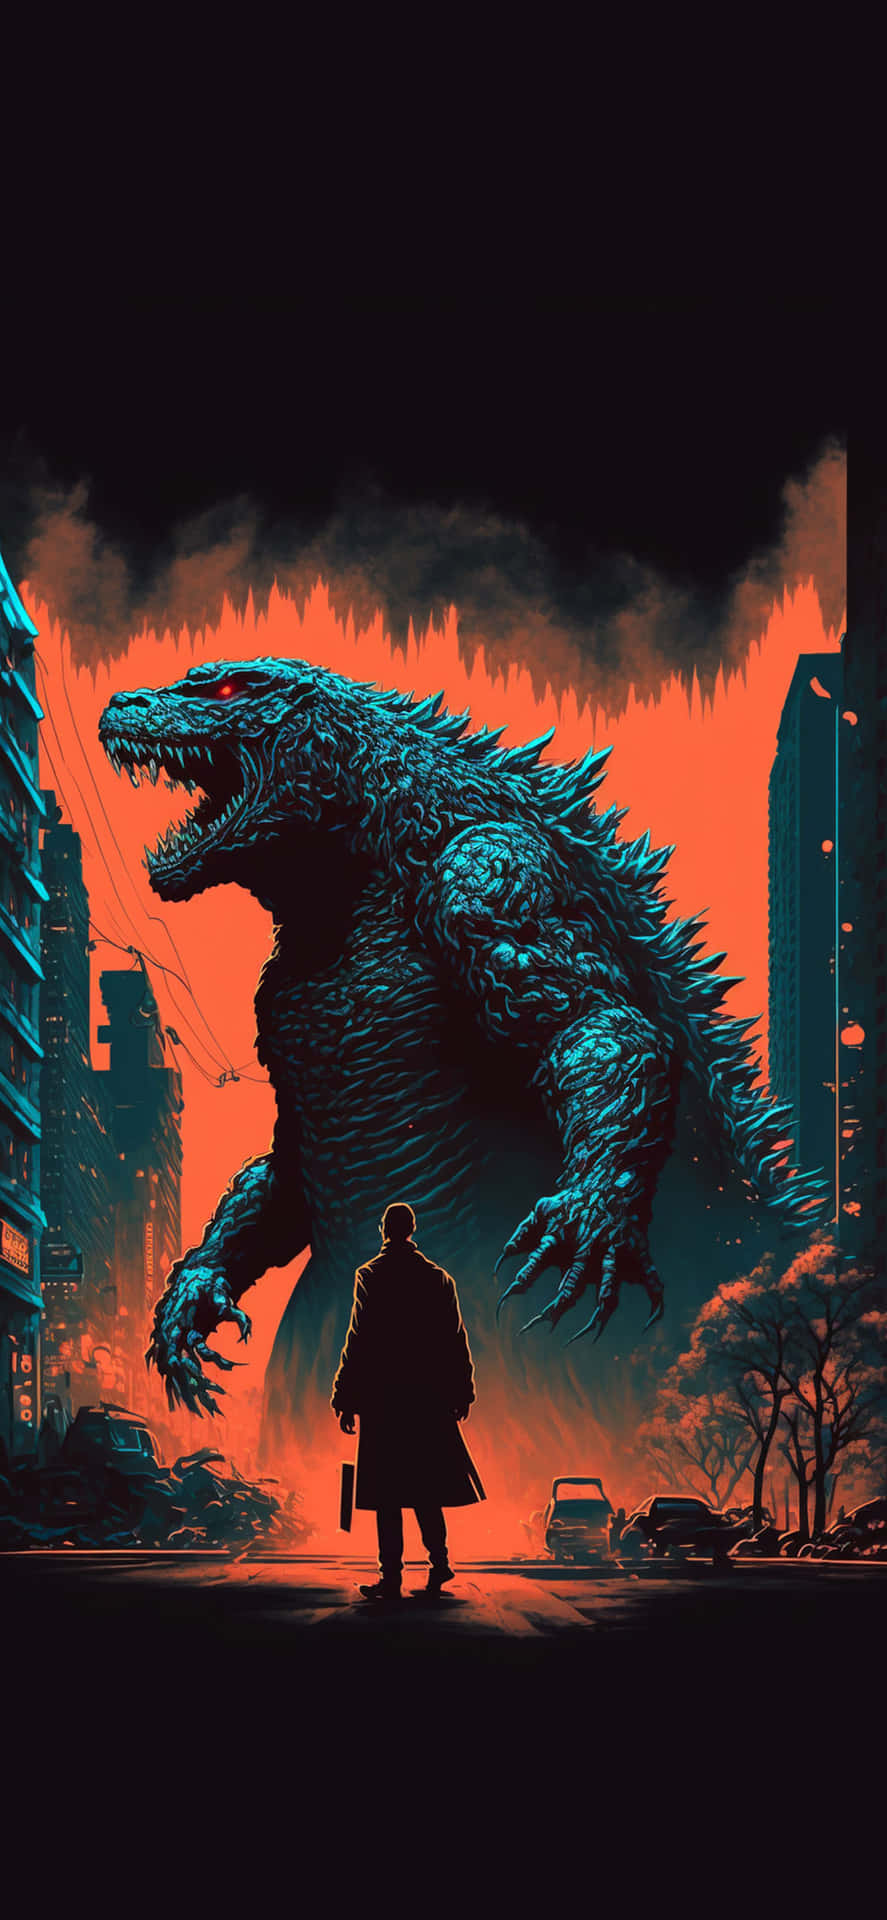 Godzilla Art In City With Man's Silhouette Picture